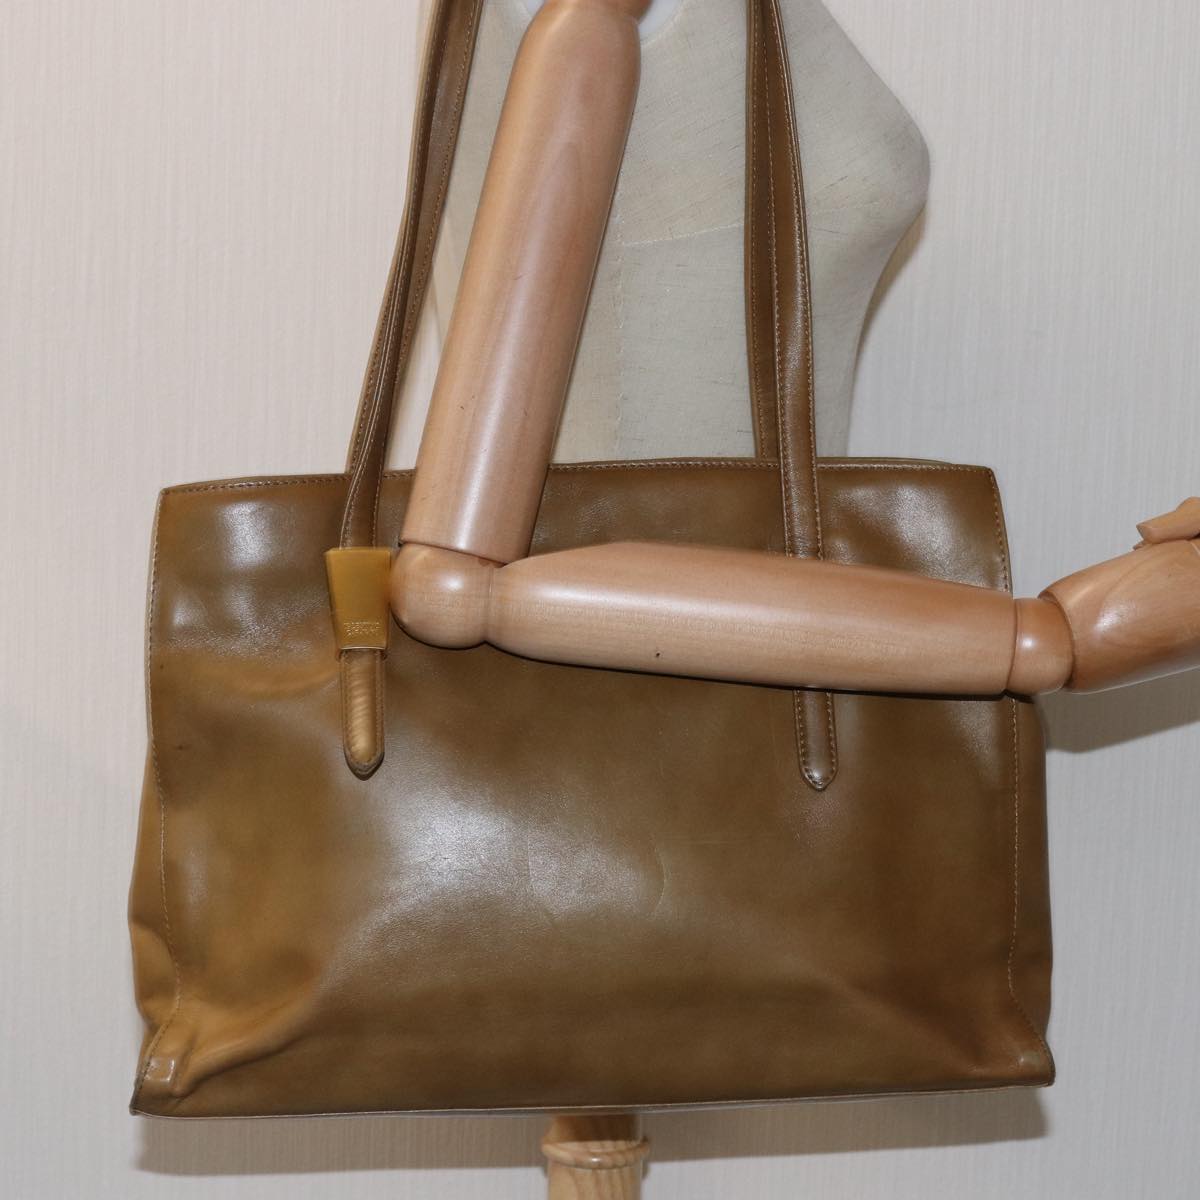 VALENTINO Tote Bag Leather Beige Auth bs14457